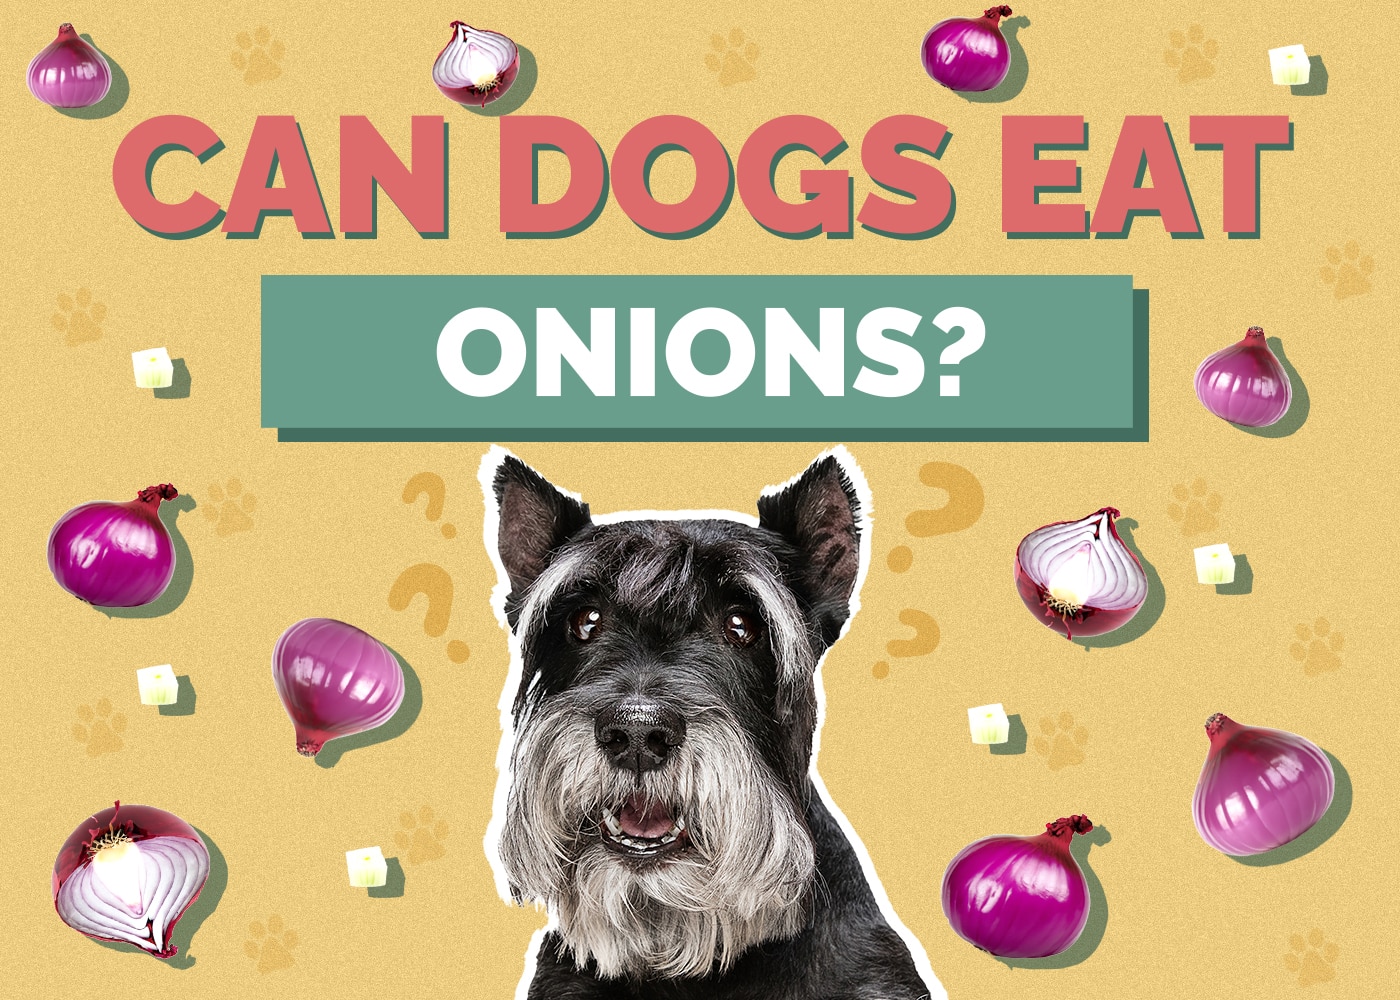 Can Dogs Eat onions